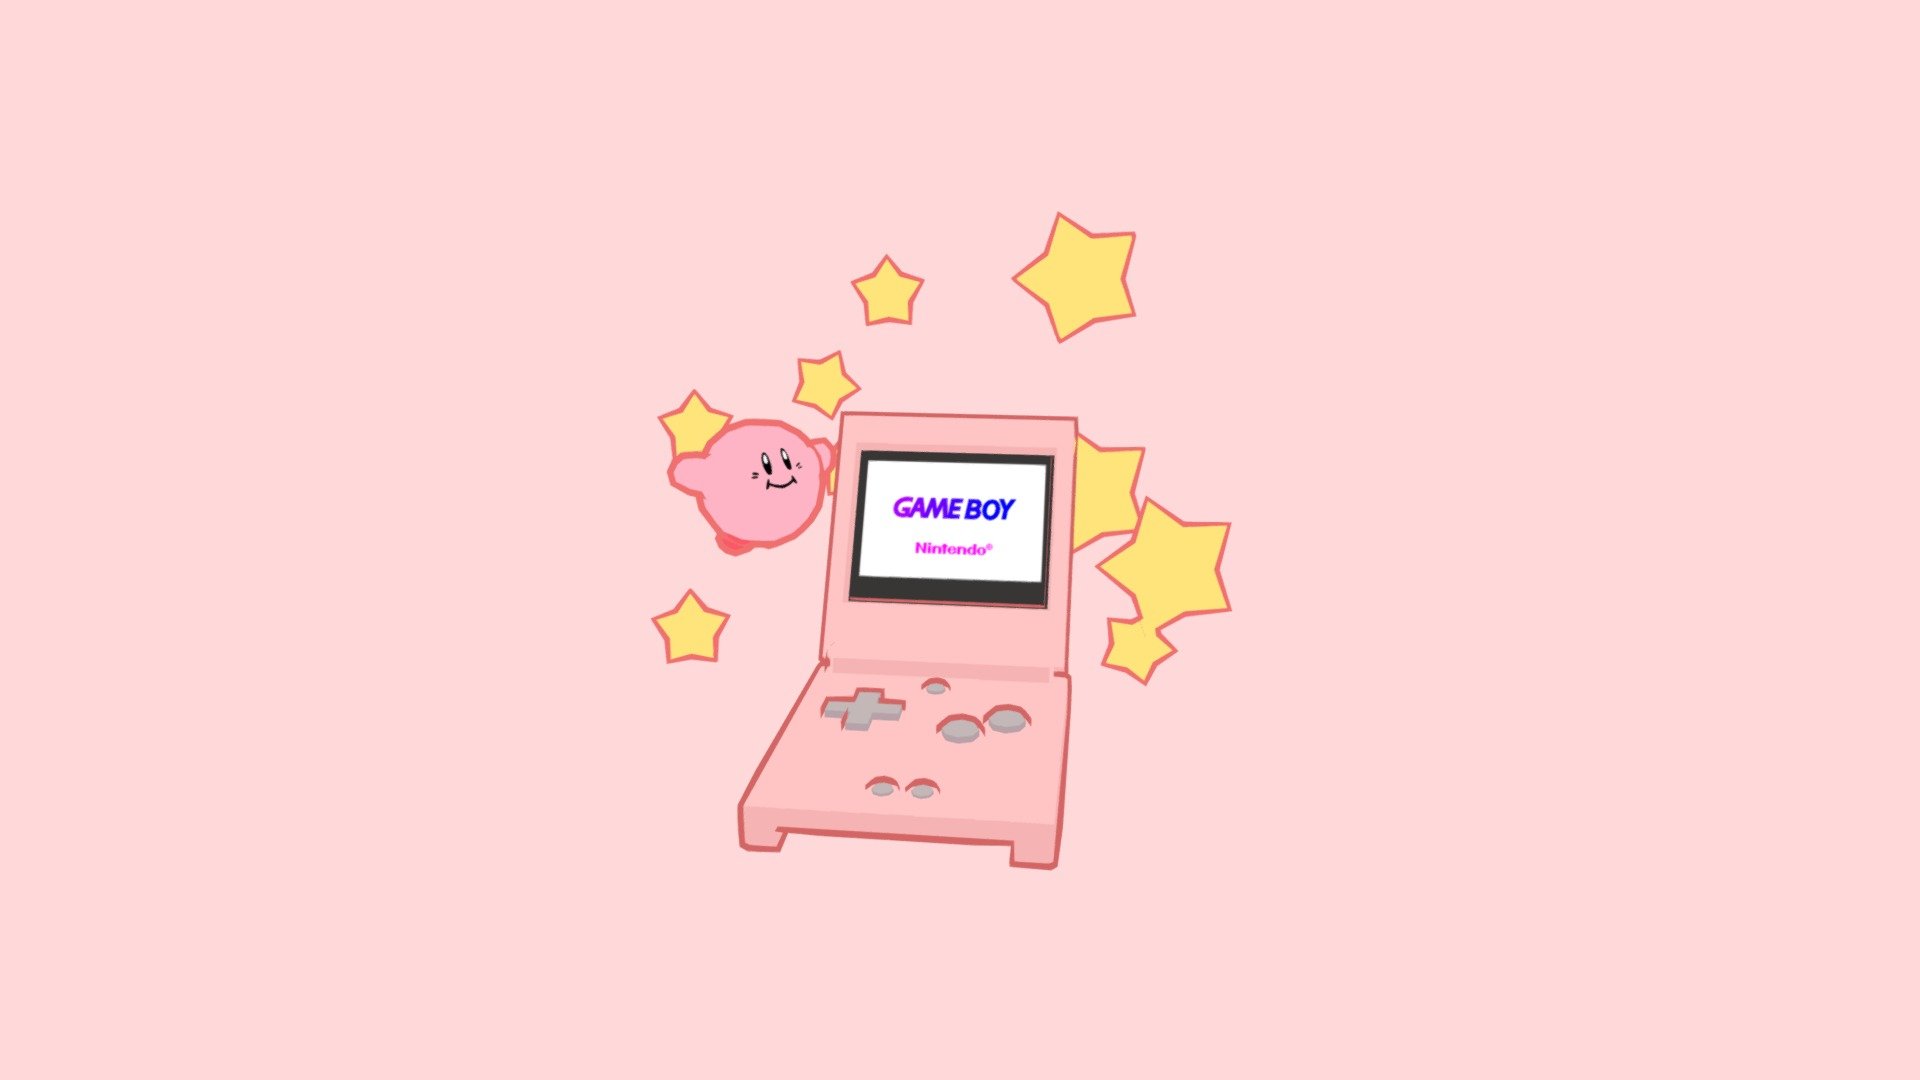 Made this Game Boy with a flying Kirby as a fun little challenge :) 

I used Maya and Substance Painter for this scene - Game Boy Kirby - 3D model by FantastiskaFrida 3d model